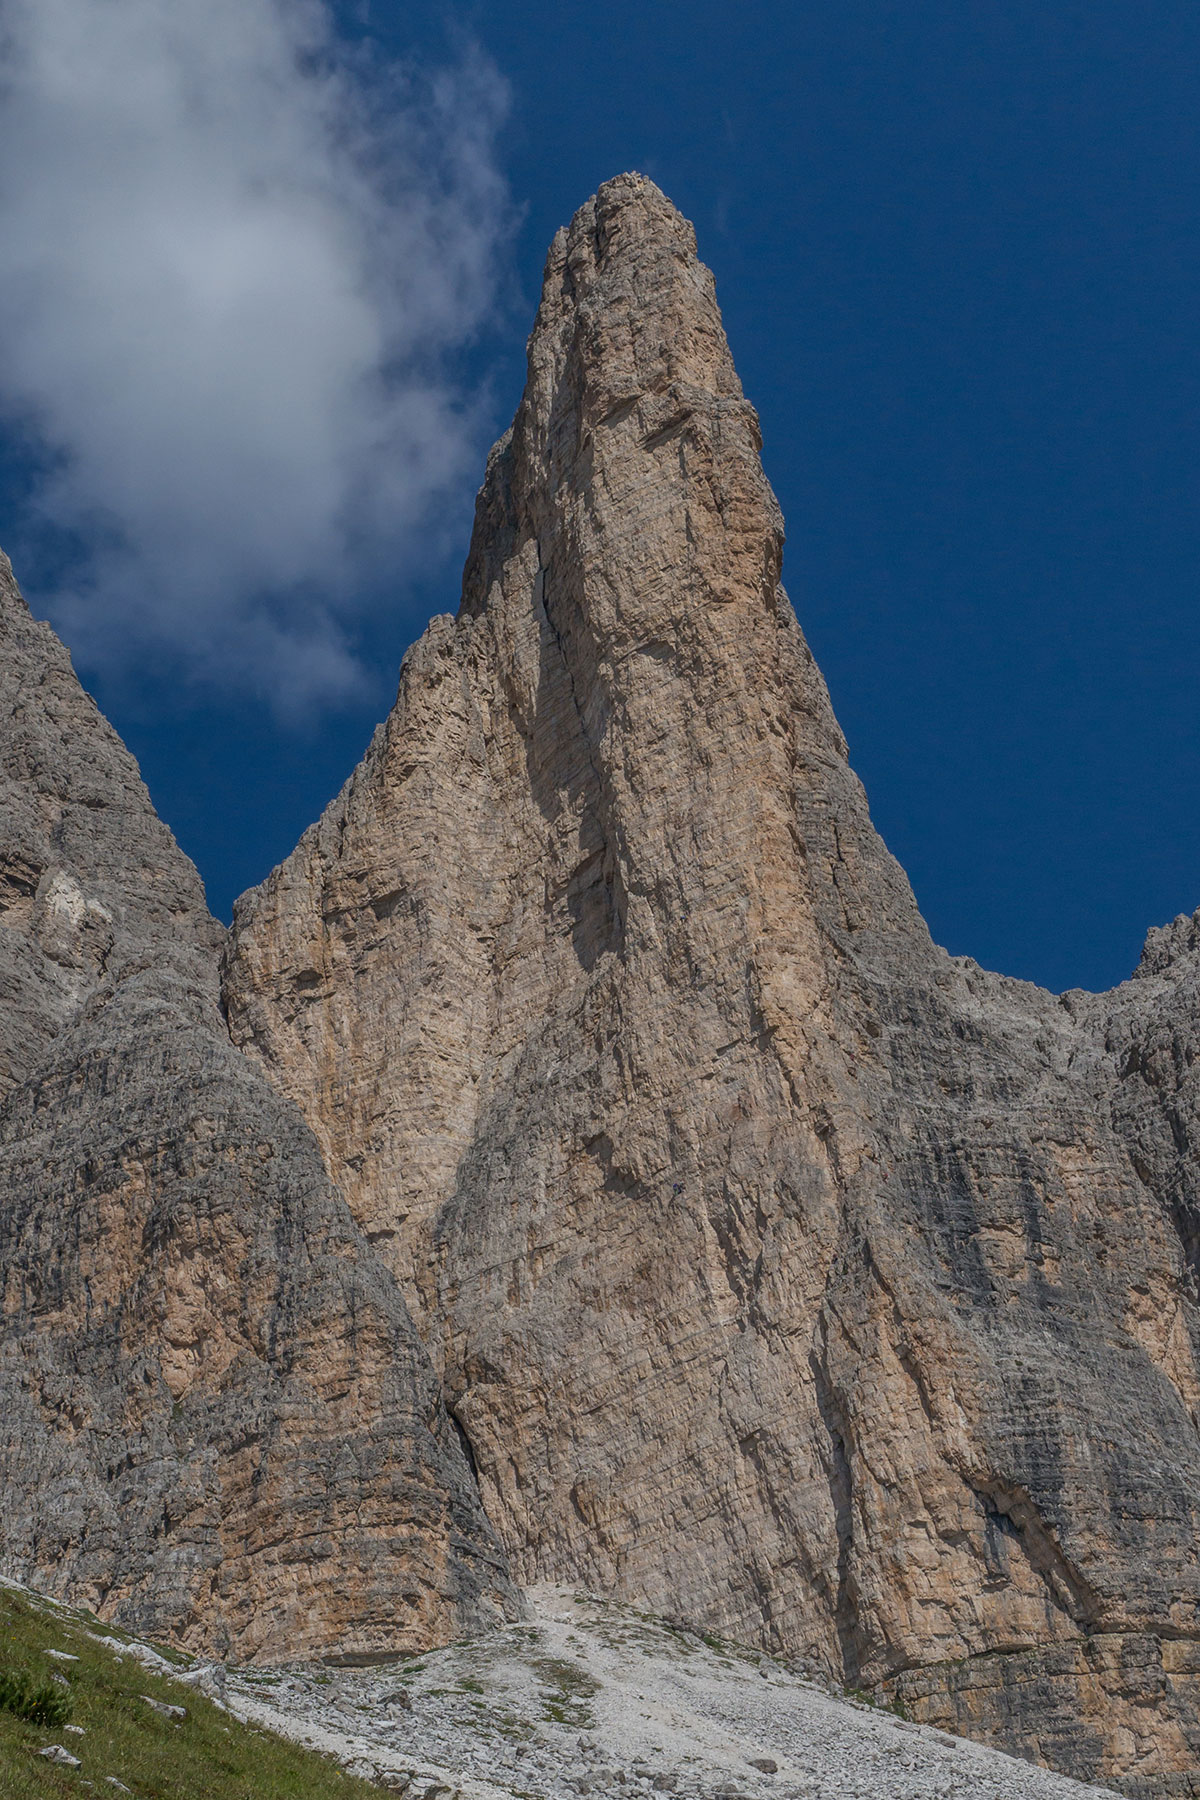 Small Pinnacle - West face of the Three Peaks Dolomites, Italy - 